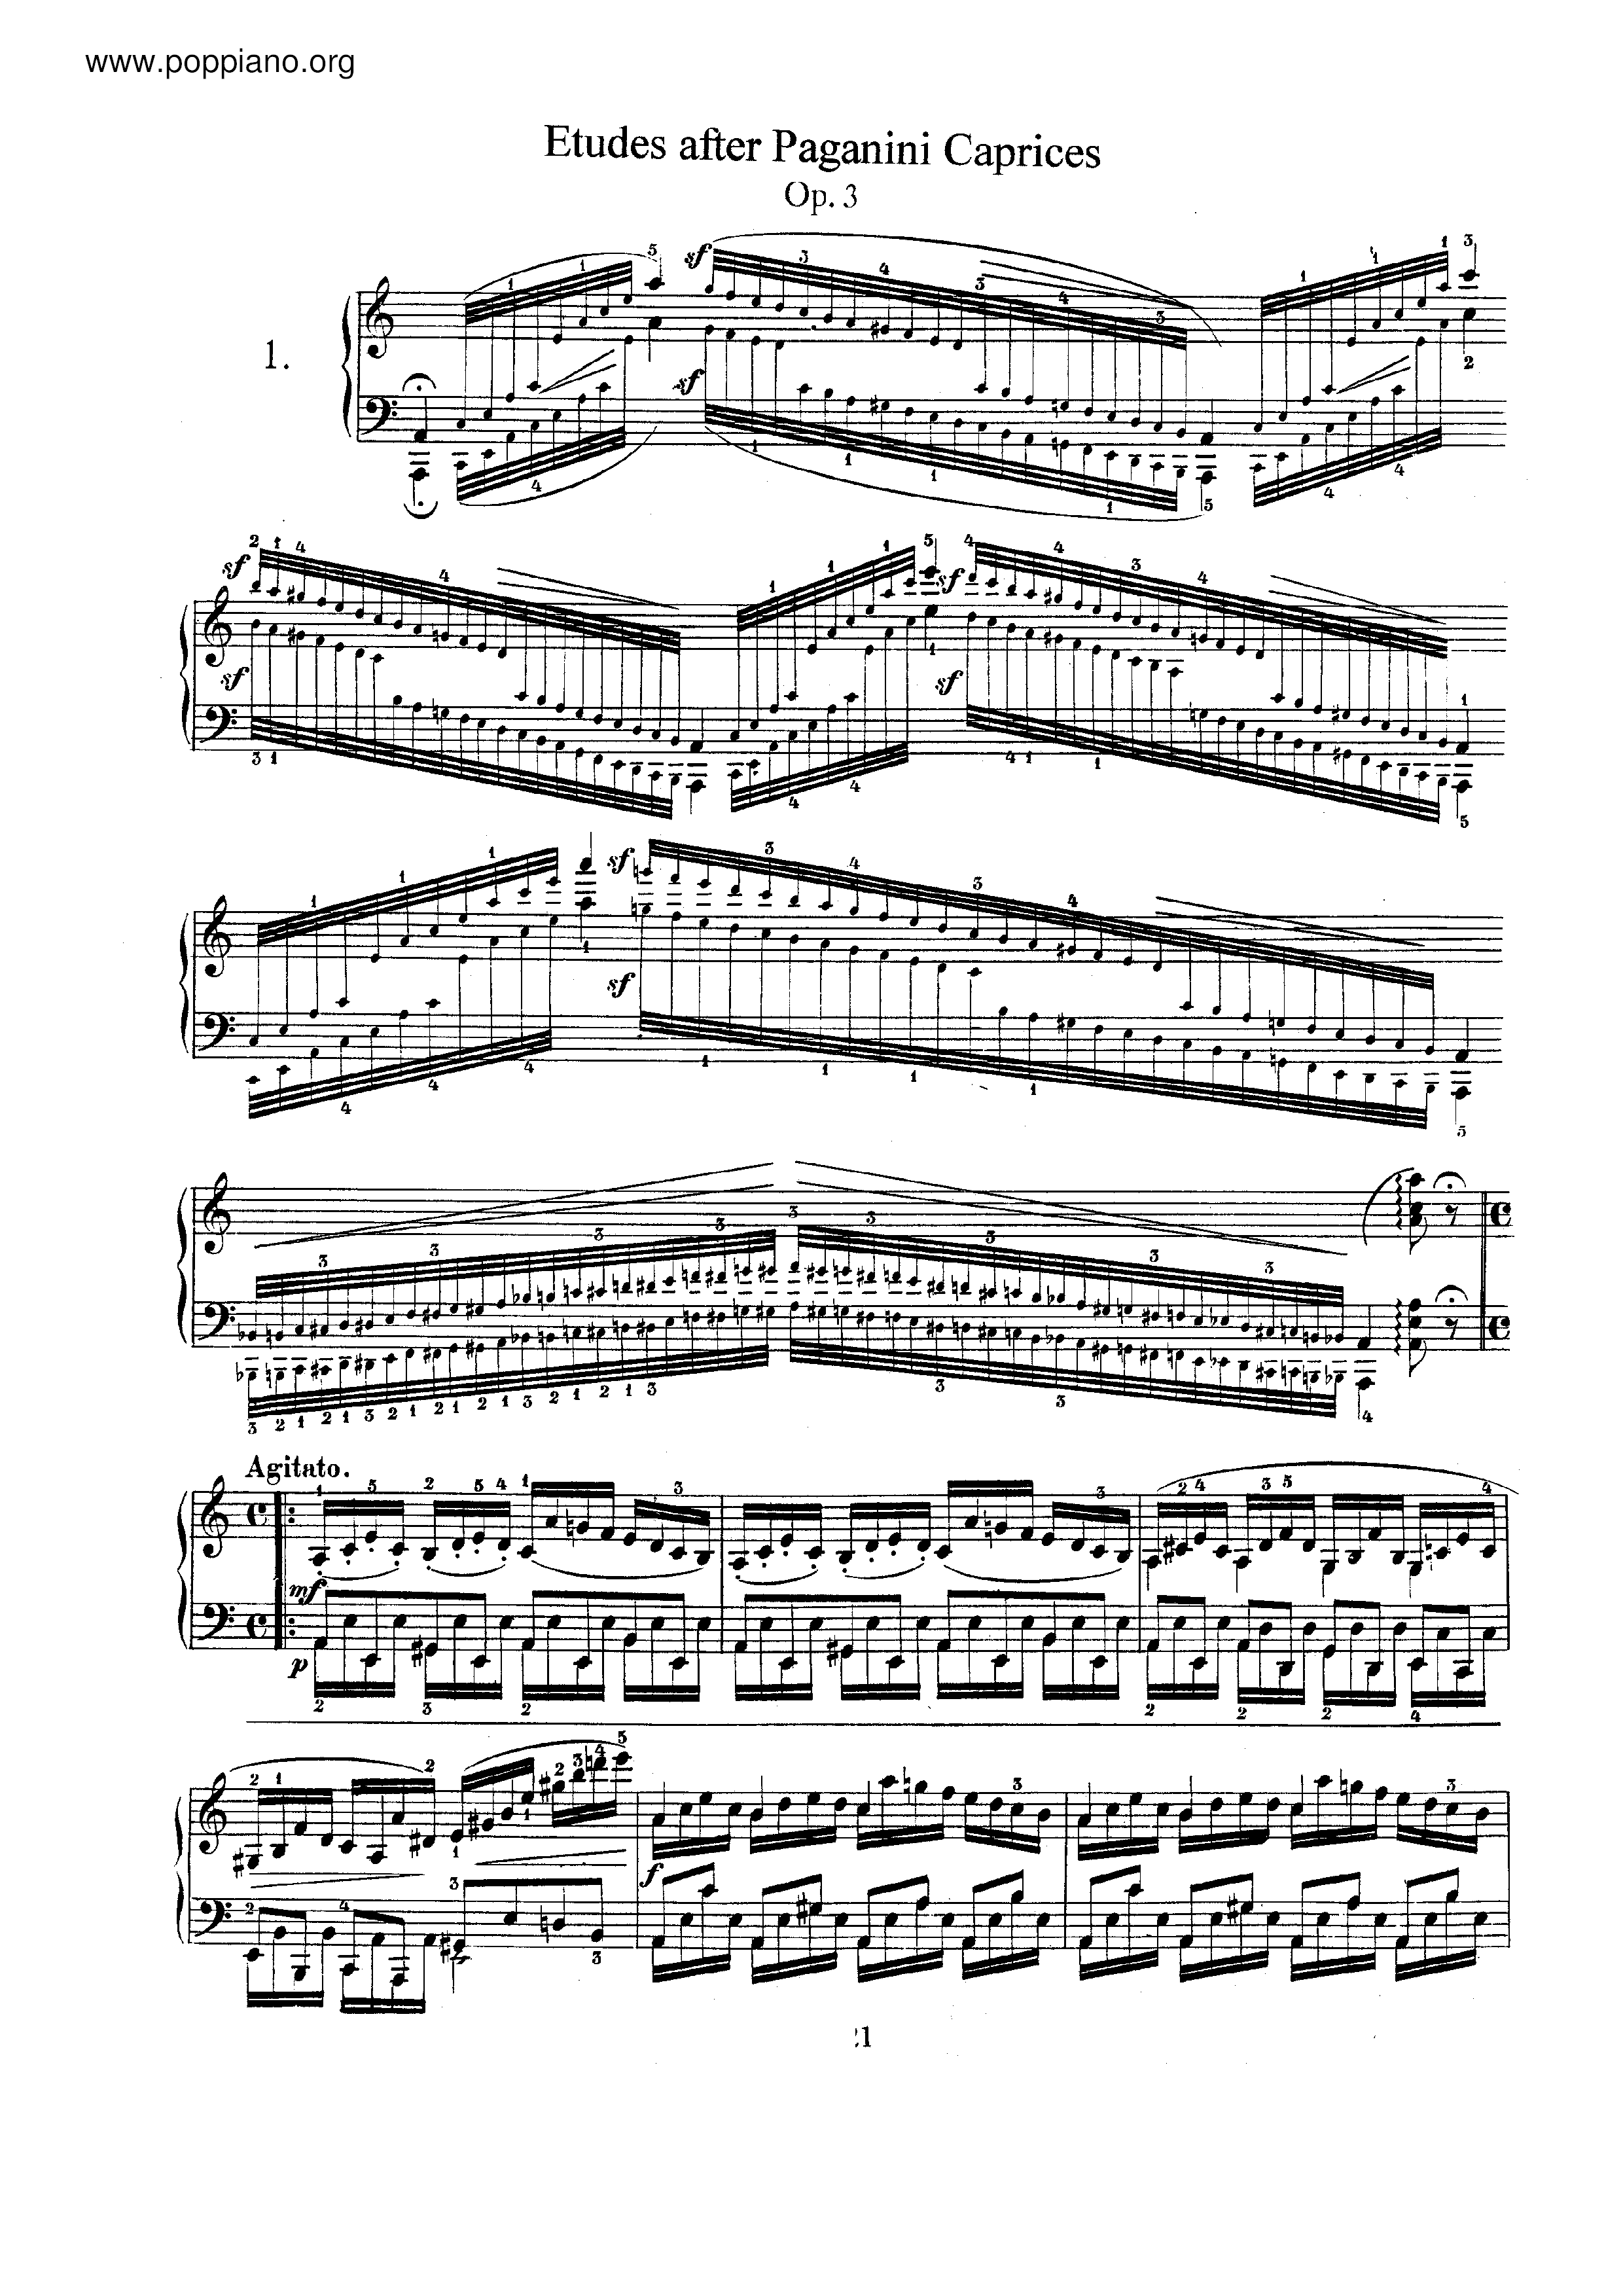 Etudes after Paganini Caprices, Op.3 Score